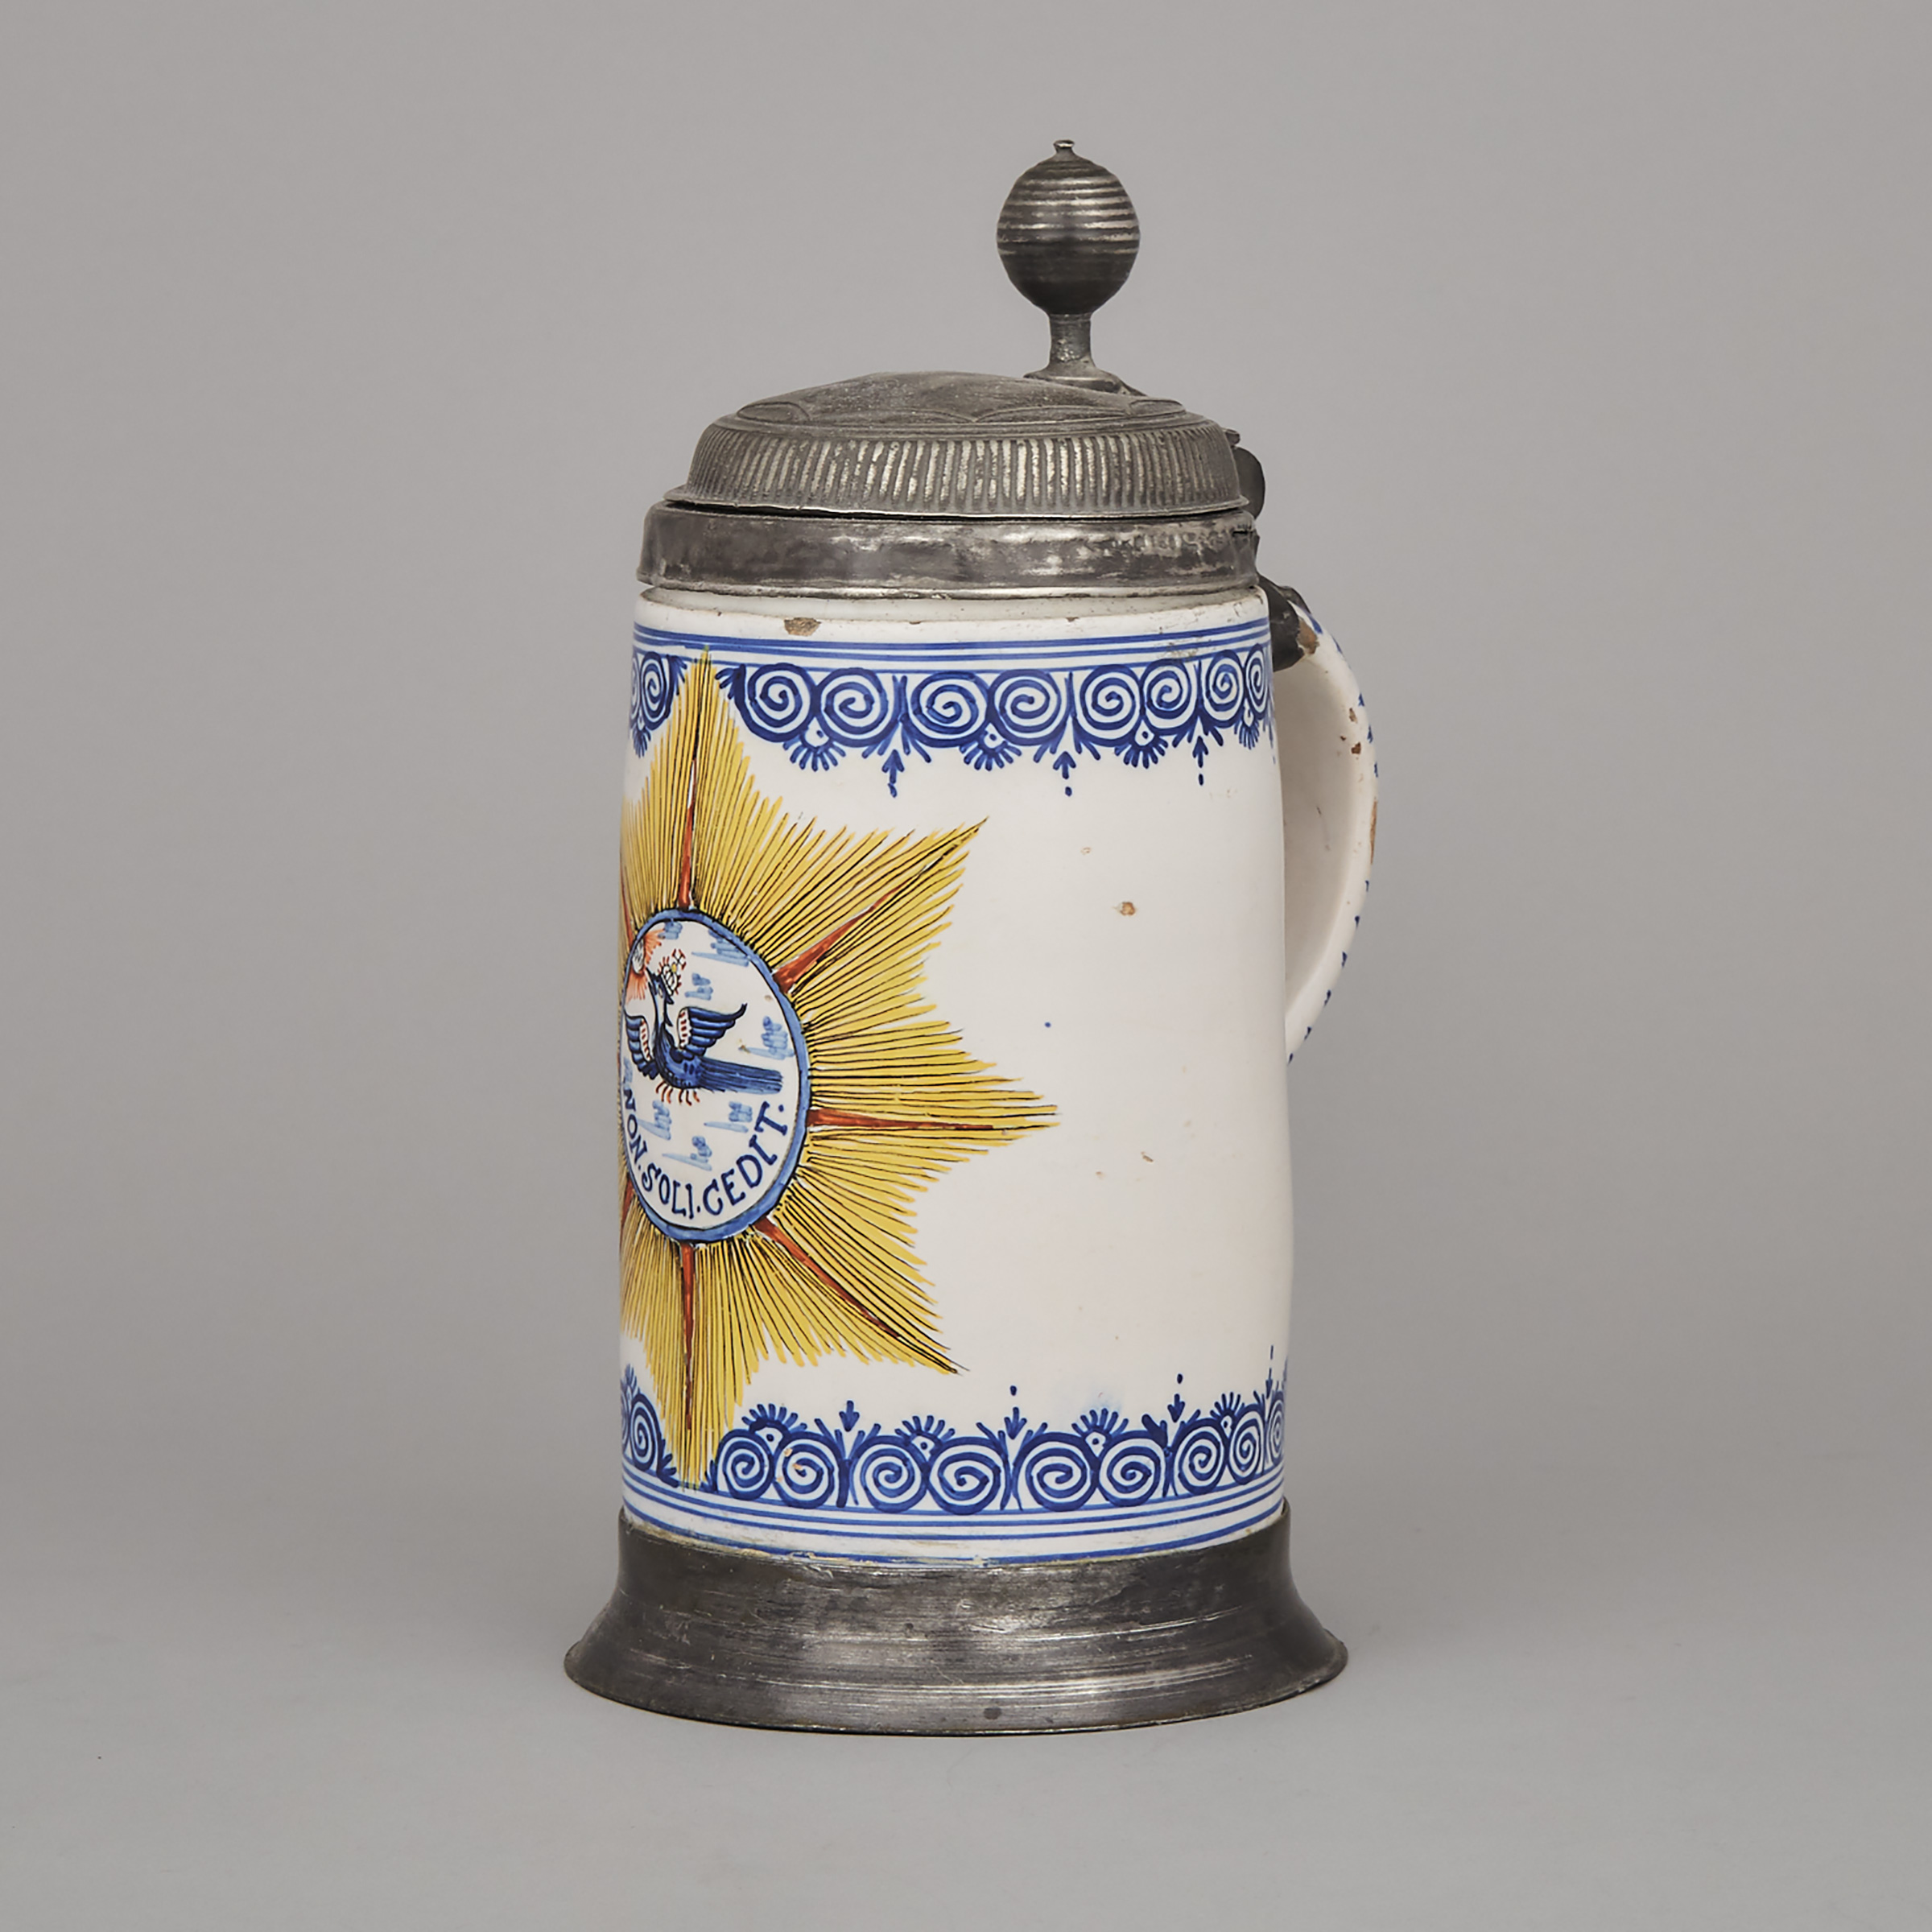 German Pewter Mounted Faience Stein, 18th century